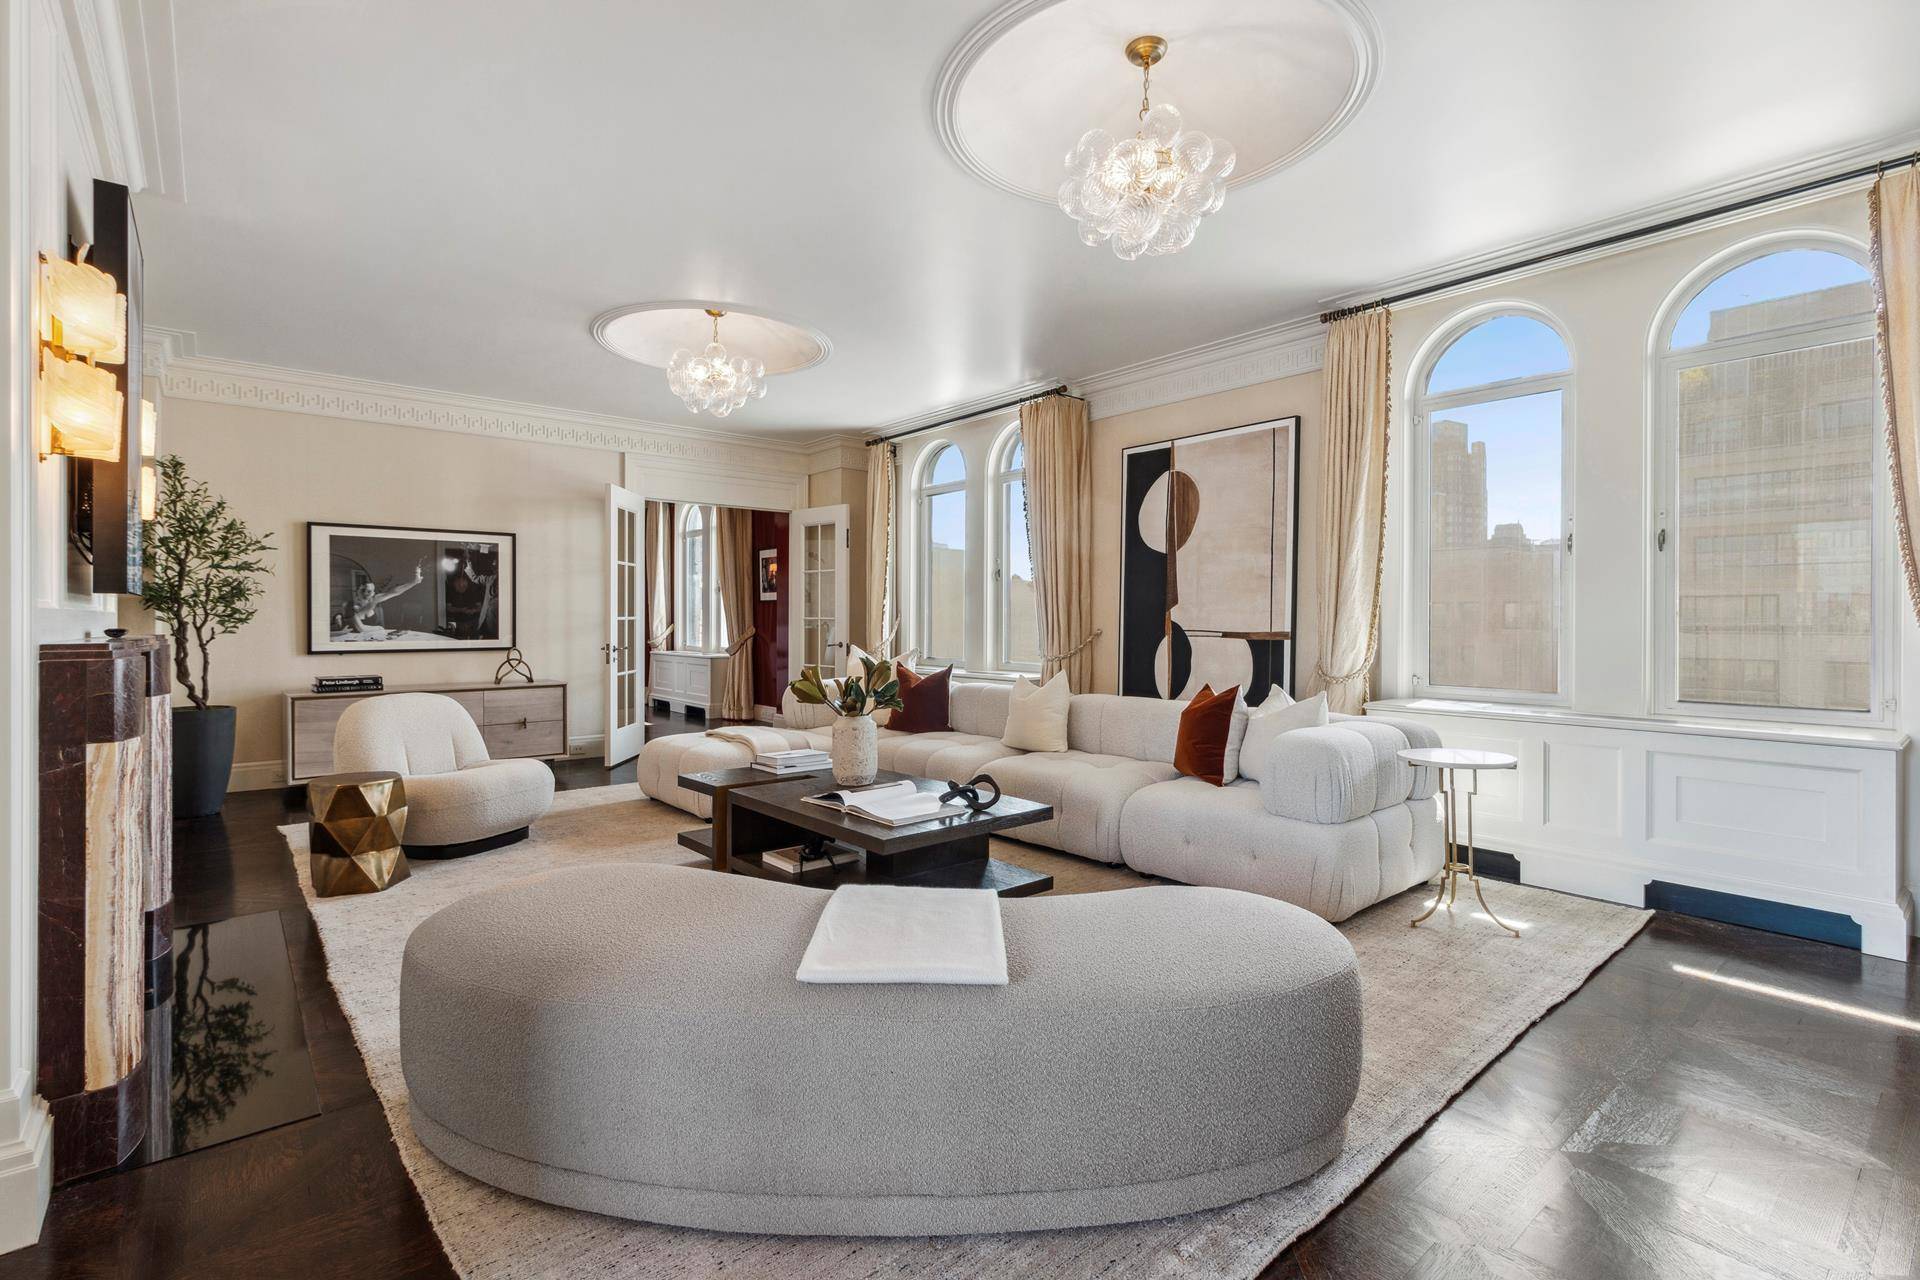 Welcome to 800 Park Avenue, residence 15, a mint condition grand apartment featuring arched double windows with open sunny Park Avenue and Skyline views.